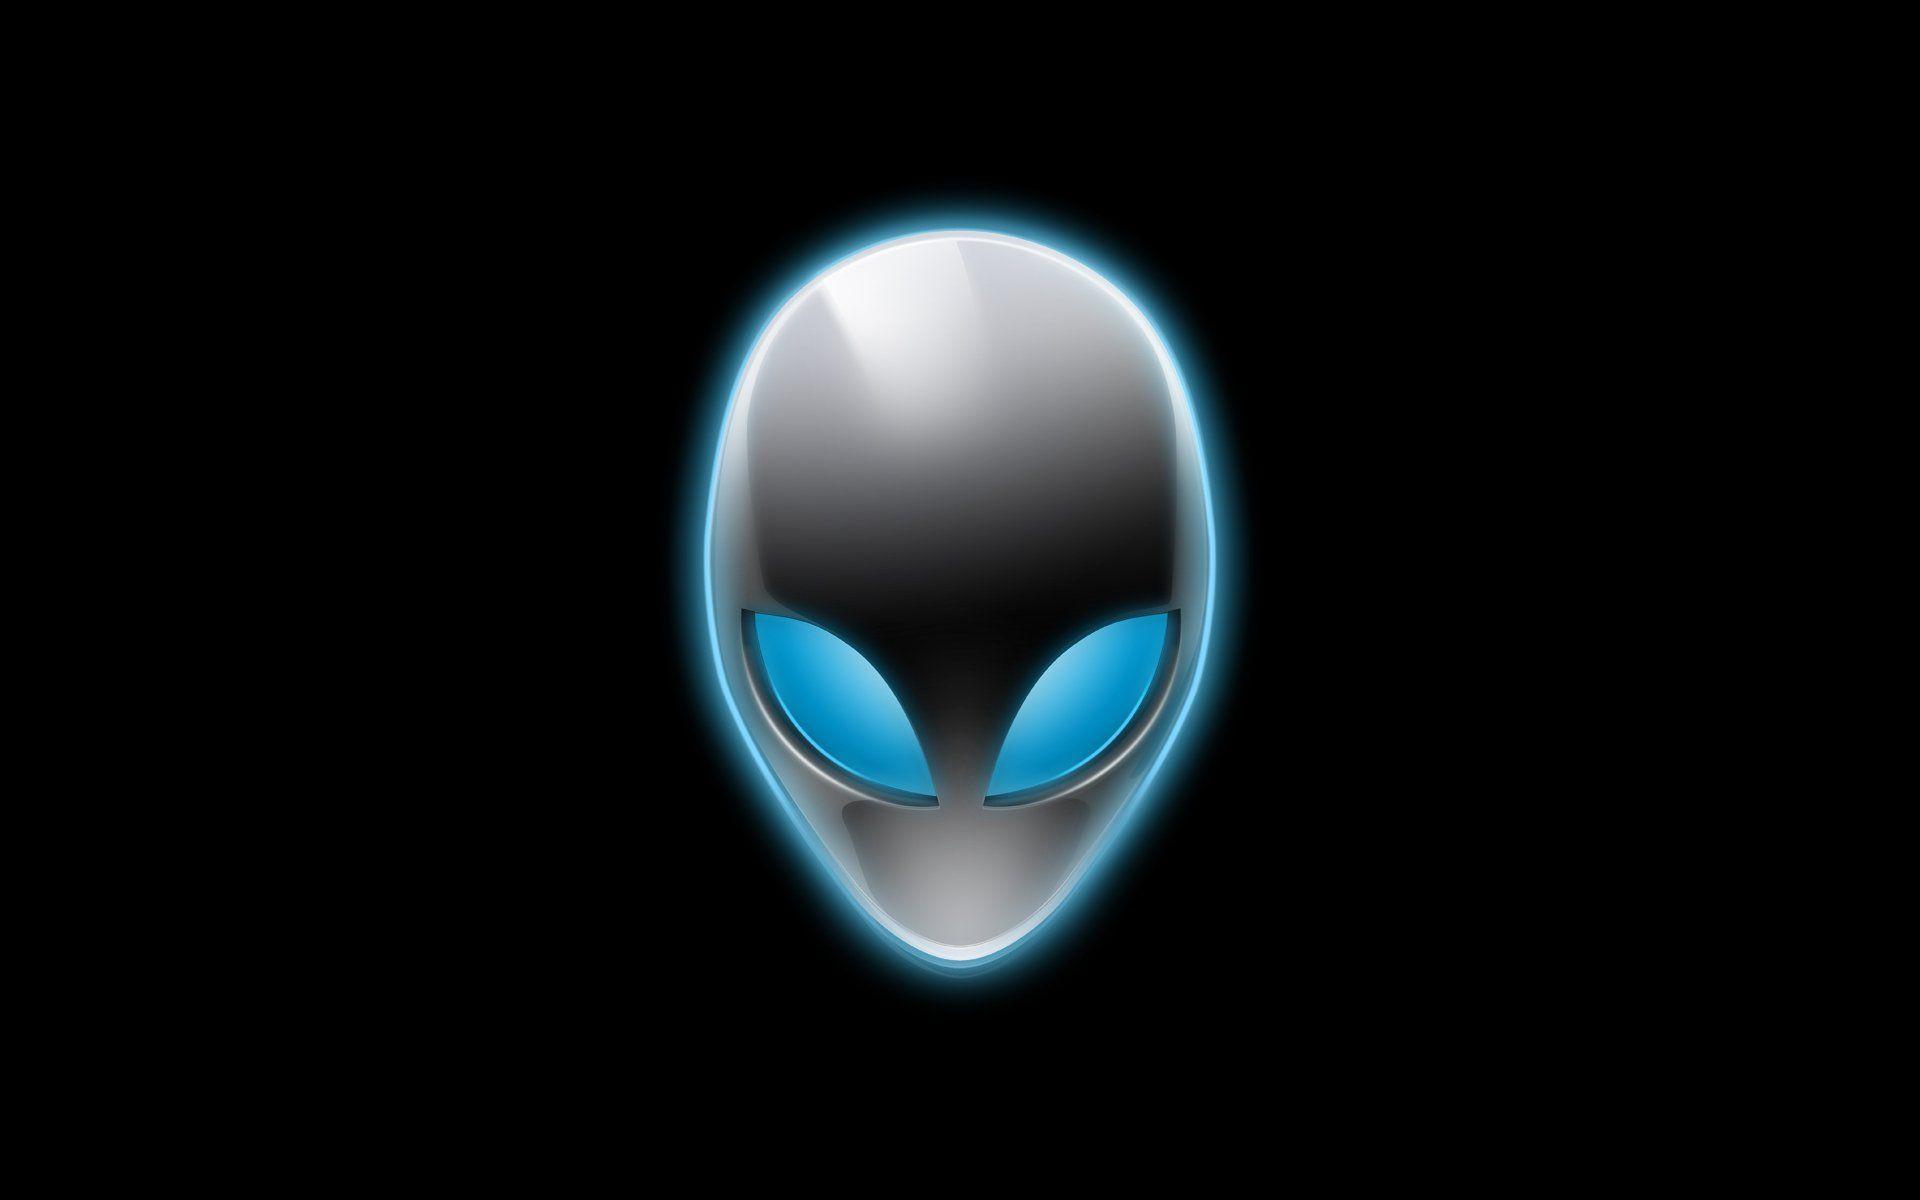 Alienware Official Wallpapers Top Free Alienware Official Backgrounds Wallpaperaccess